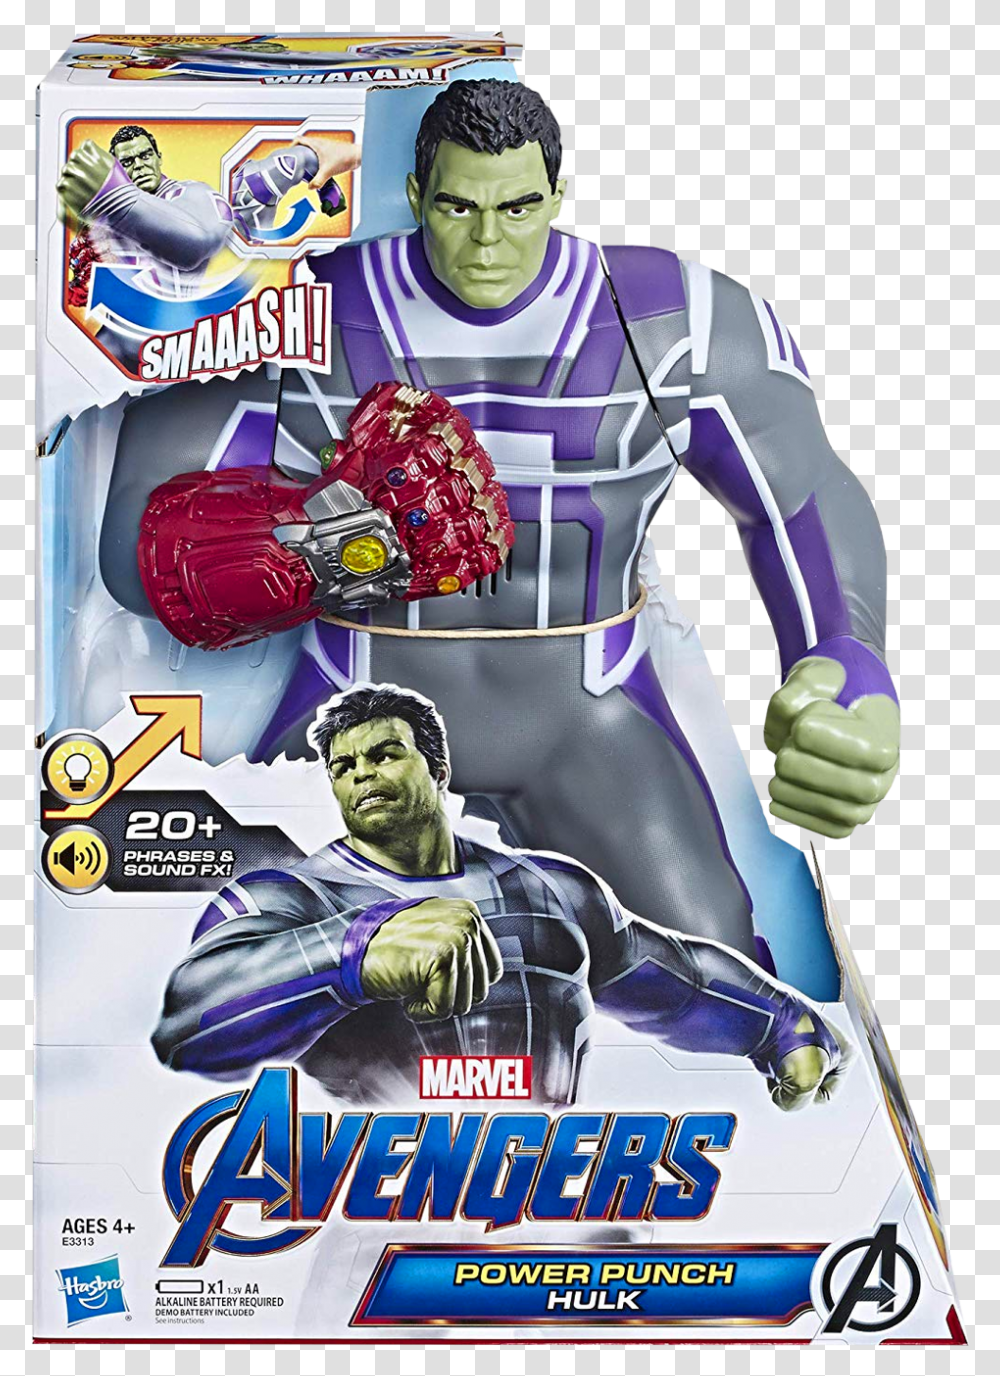 Power Punch Hulk 10 Action Figure With Sound Fx Avengers Endgame Power Punch Hulk, Person, Human, Advertisement, Poster Transparent Png